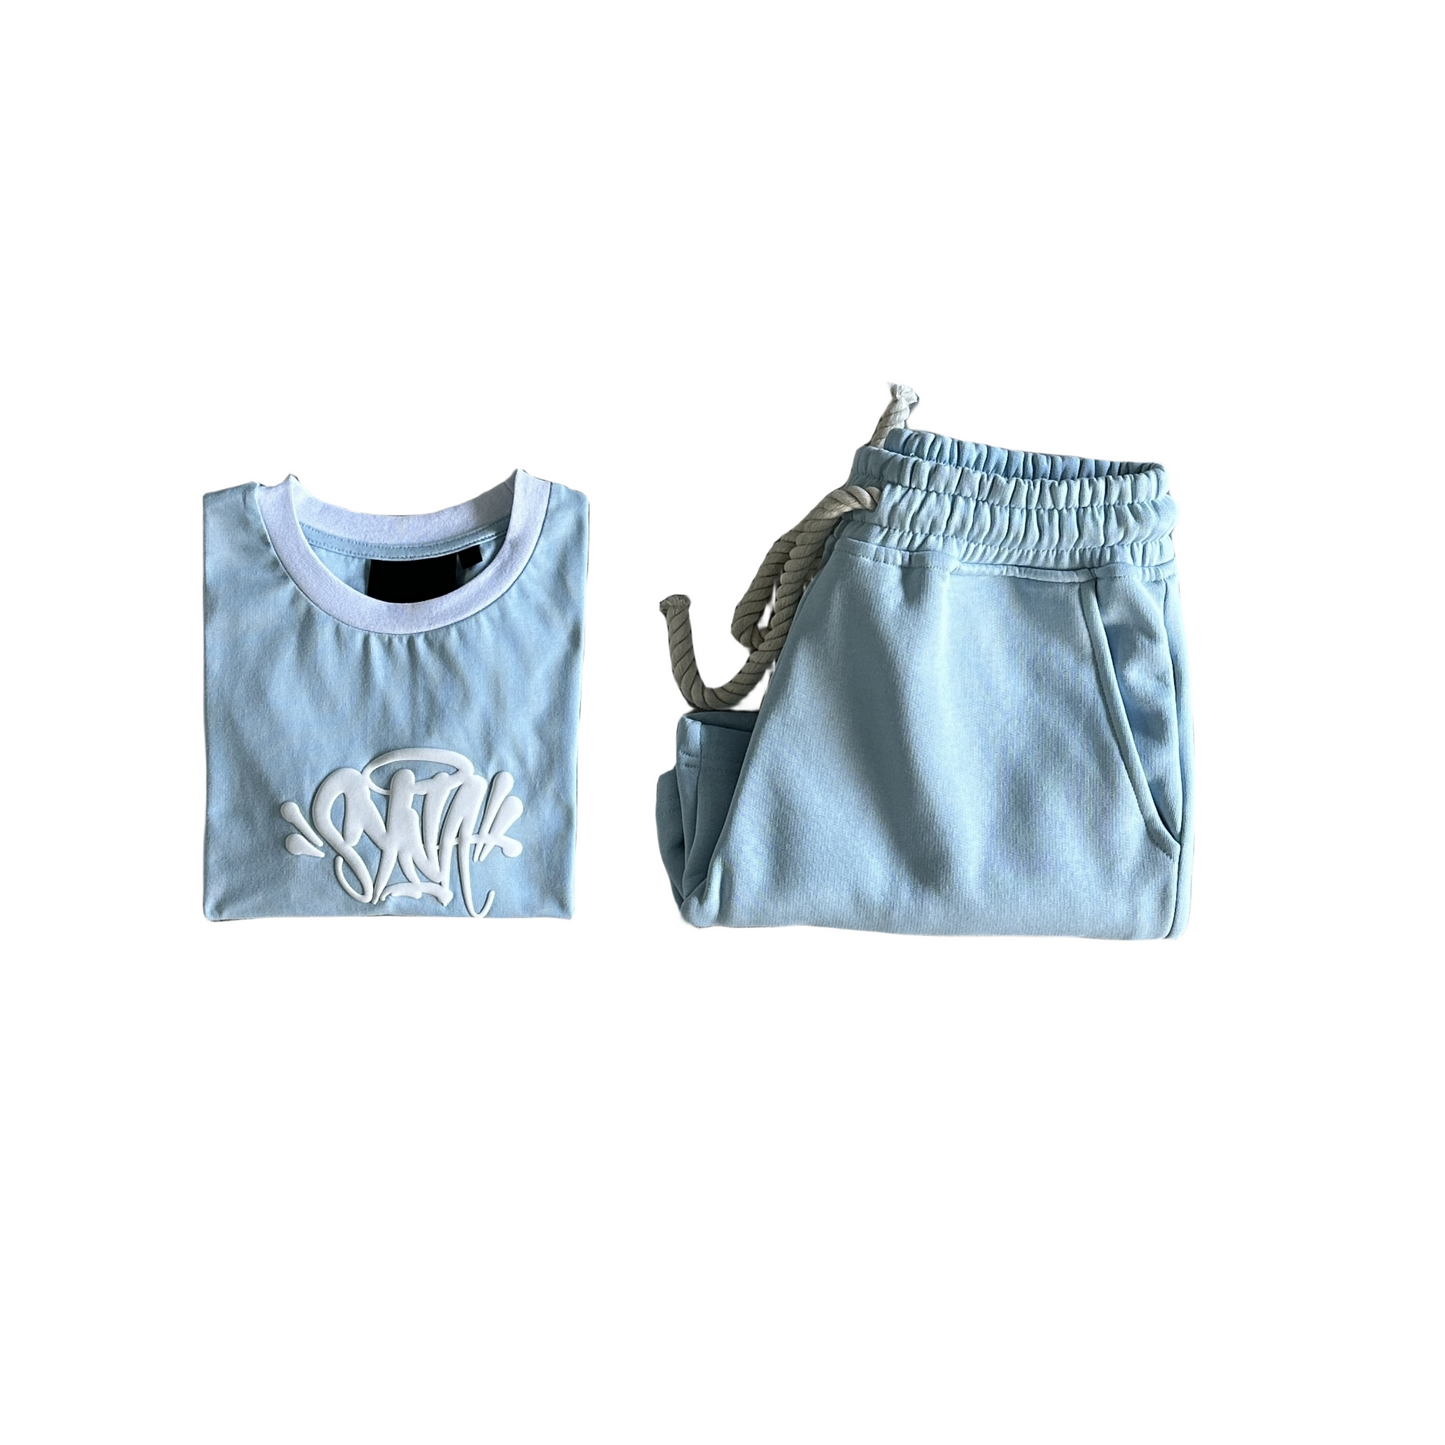 Syna World Team Womens Twinset Tee Suit - Baby blue